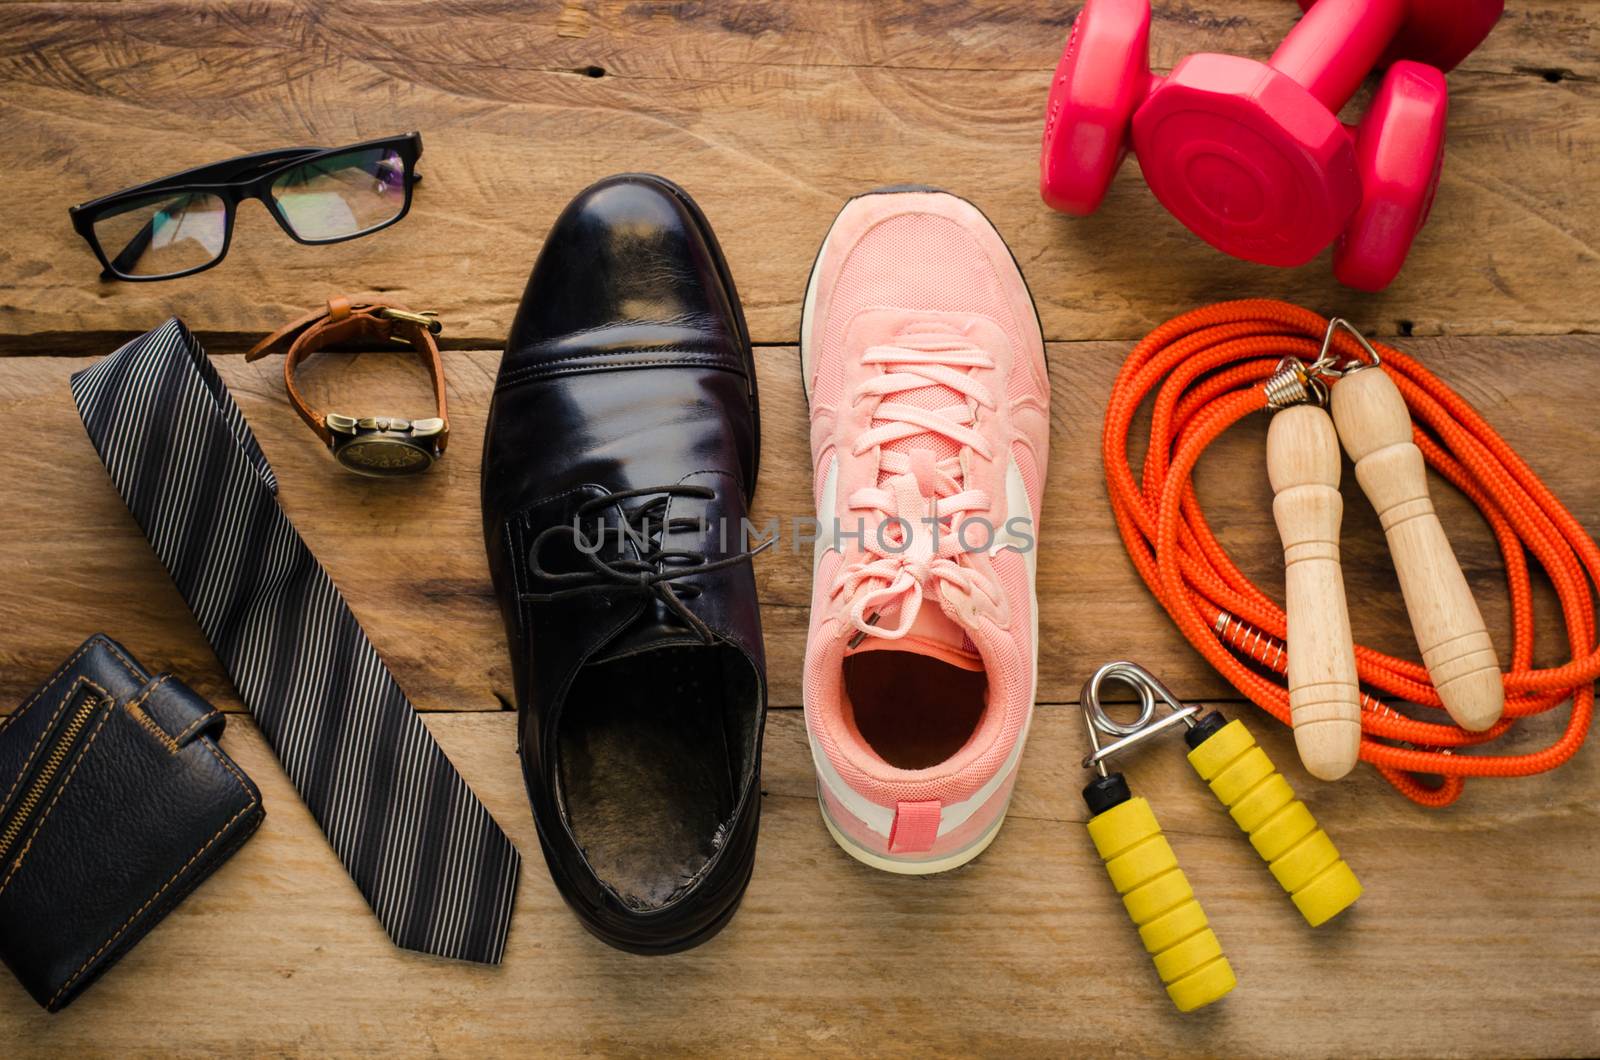 Sneakers for exercise equipment. and Leather Shoes and accessories for work on wood floors lifestyle concept. by photobyphotoboy